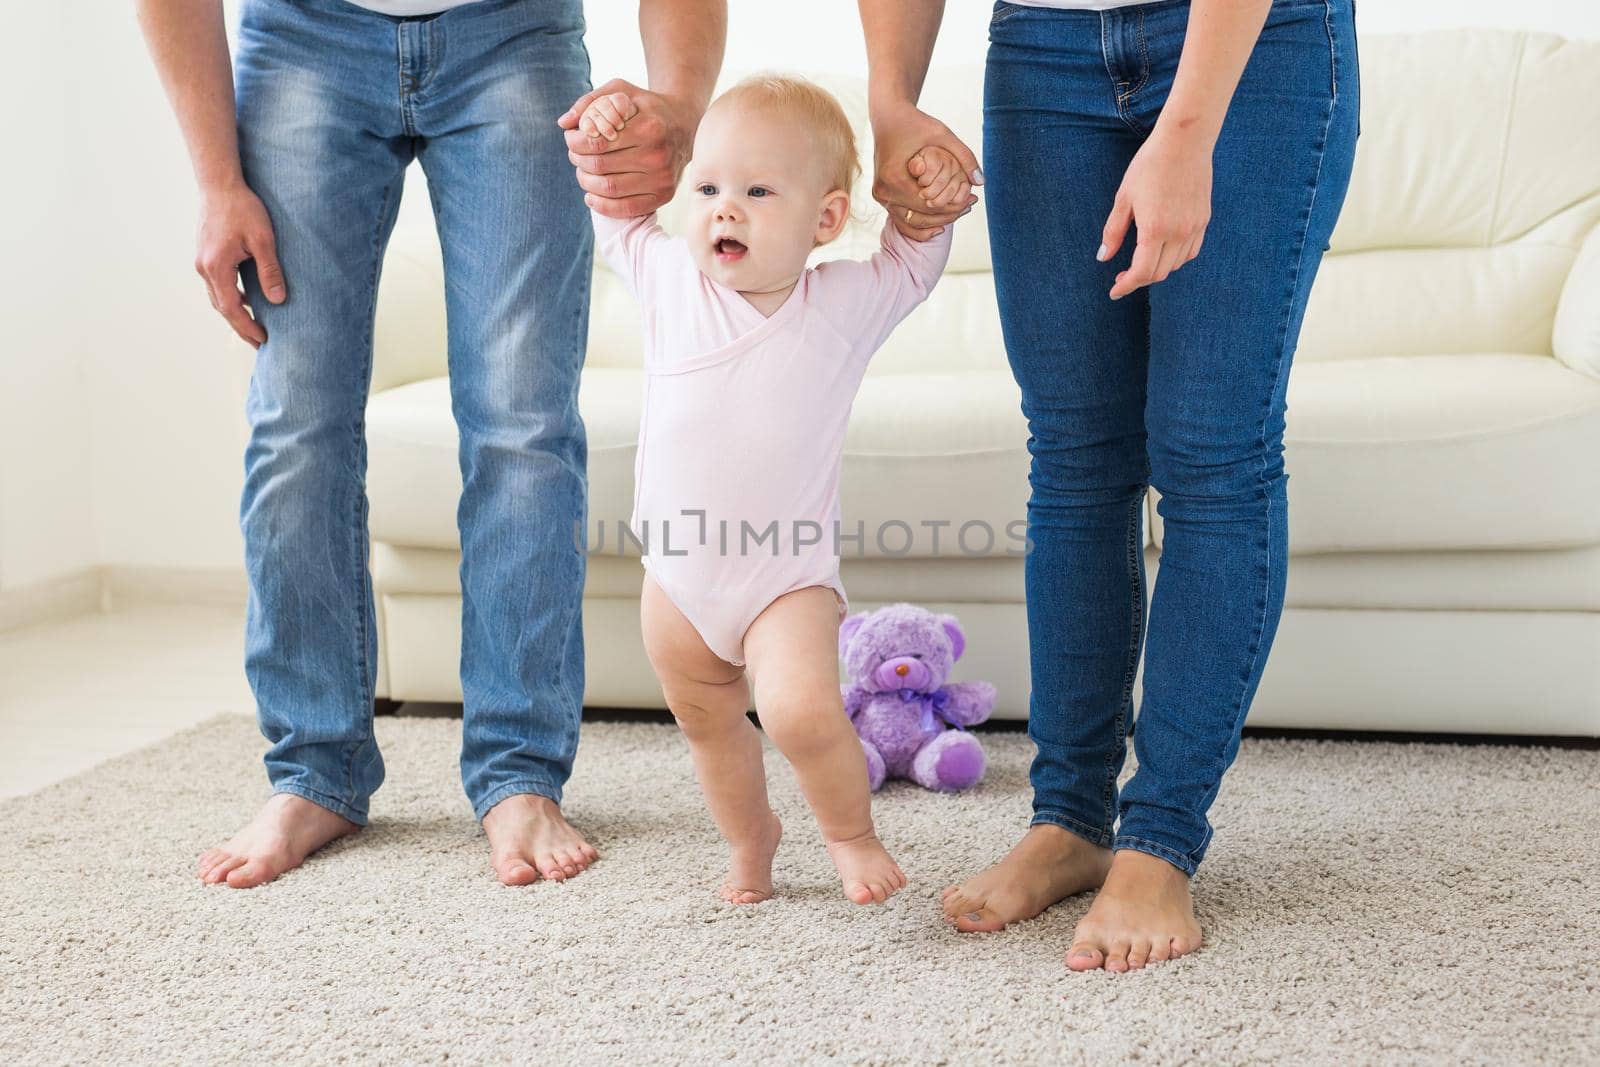 Baby taking first steps with mother's and father's help at home by Satura86